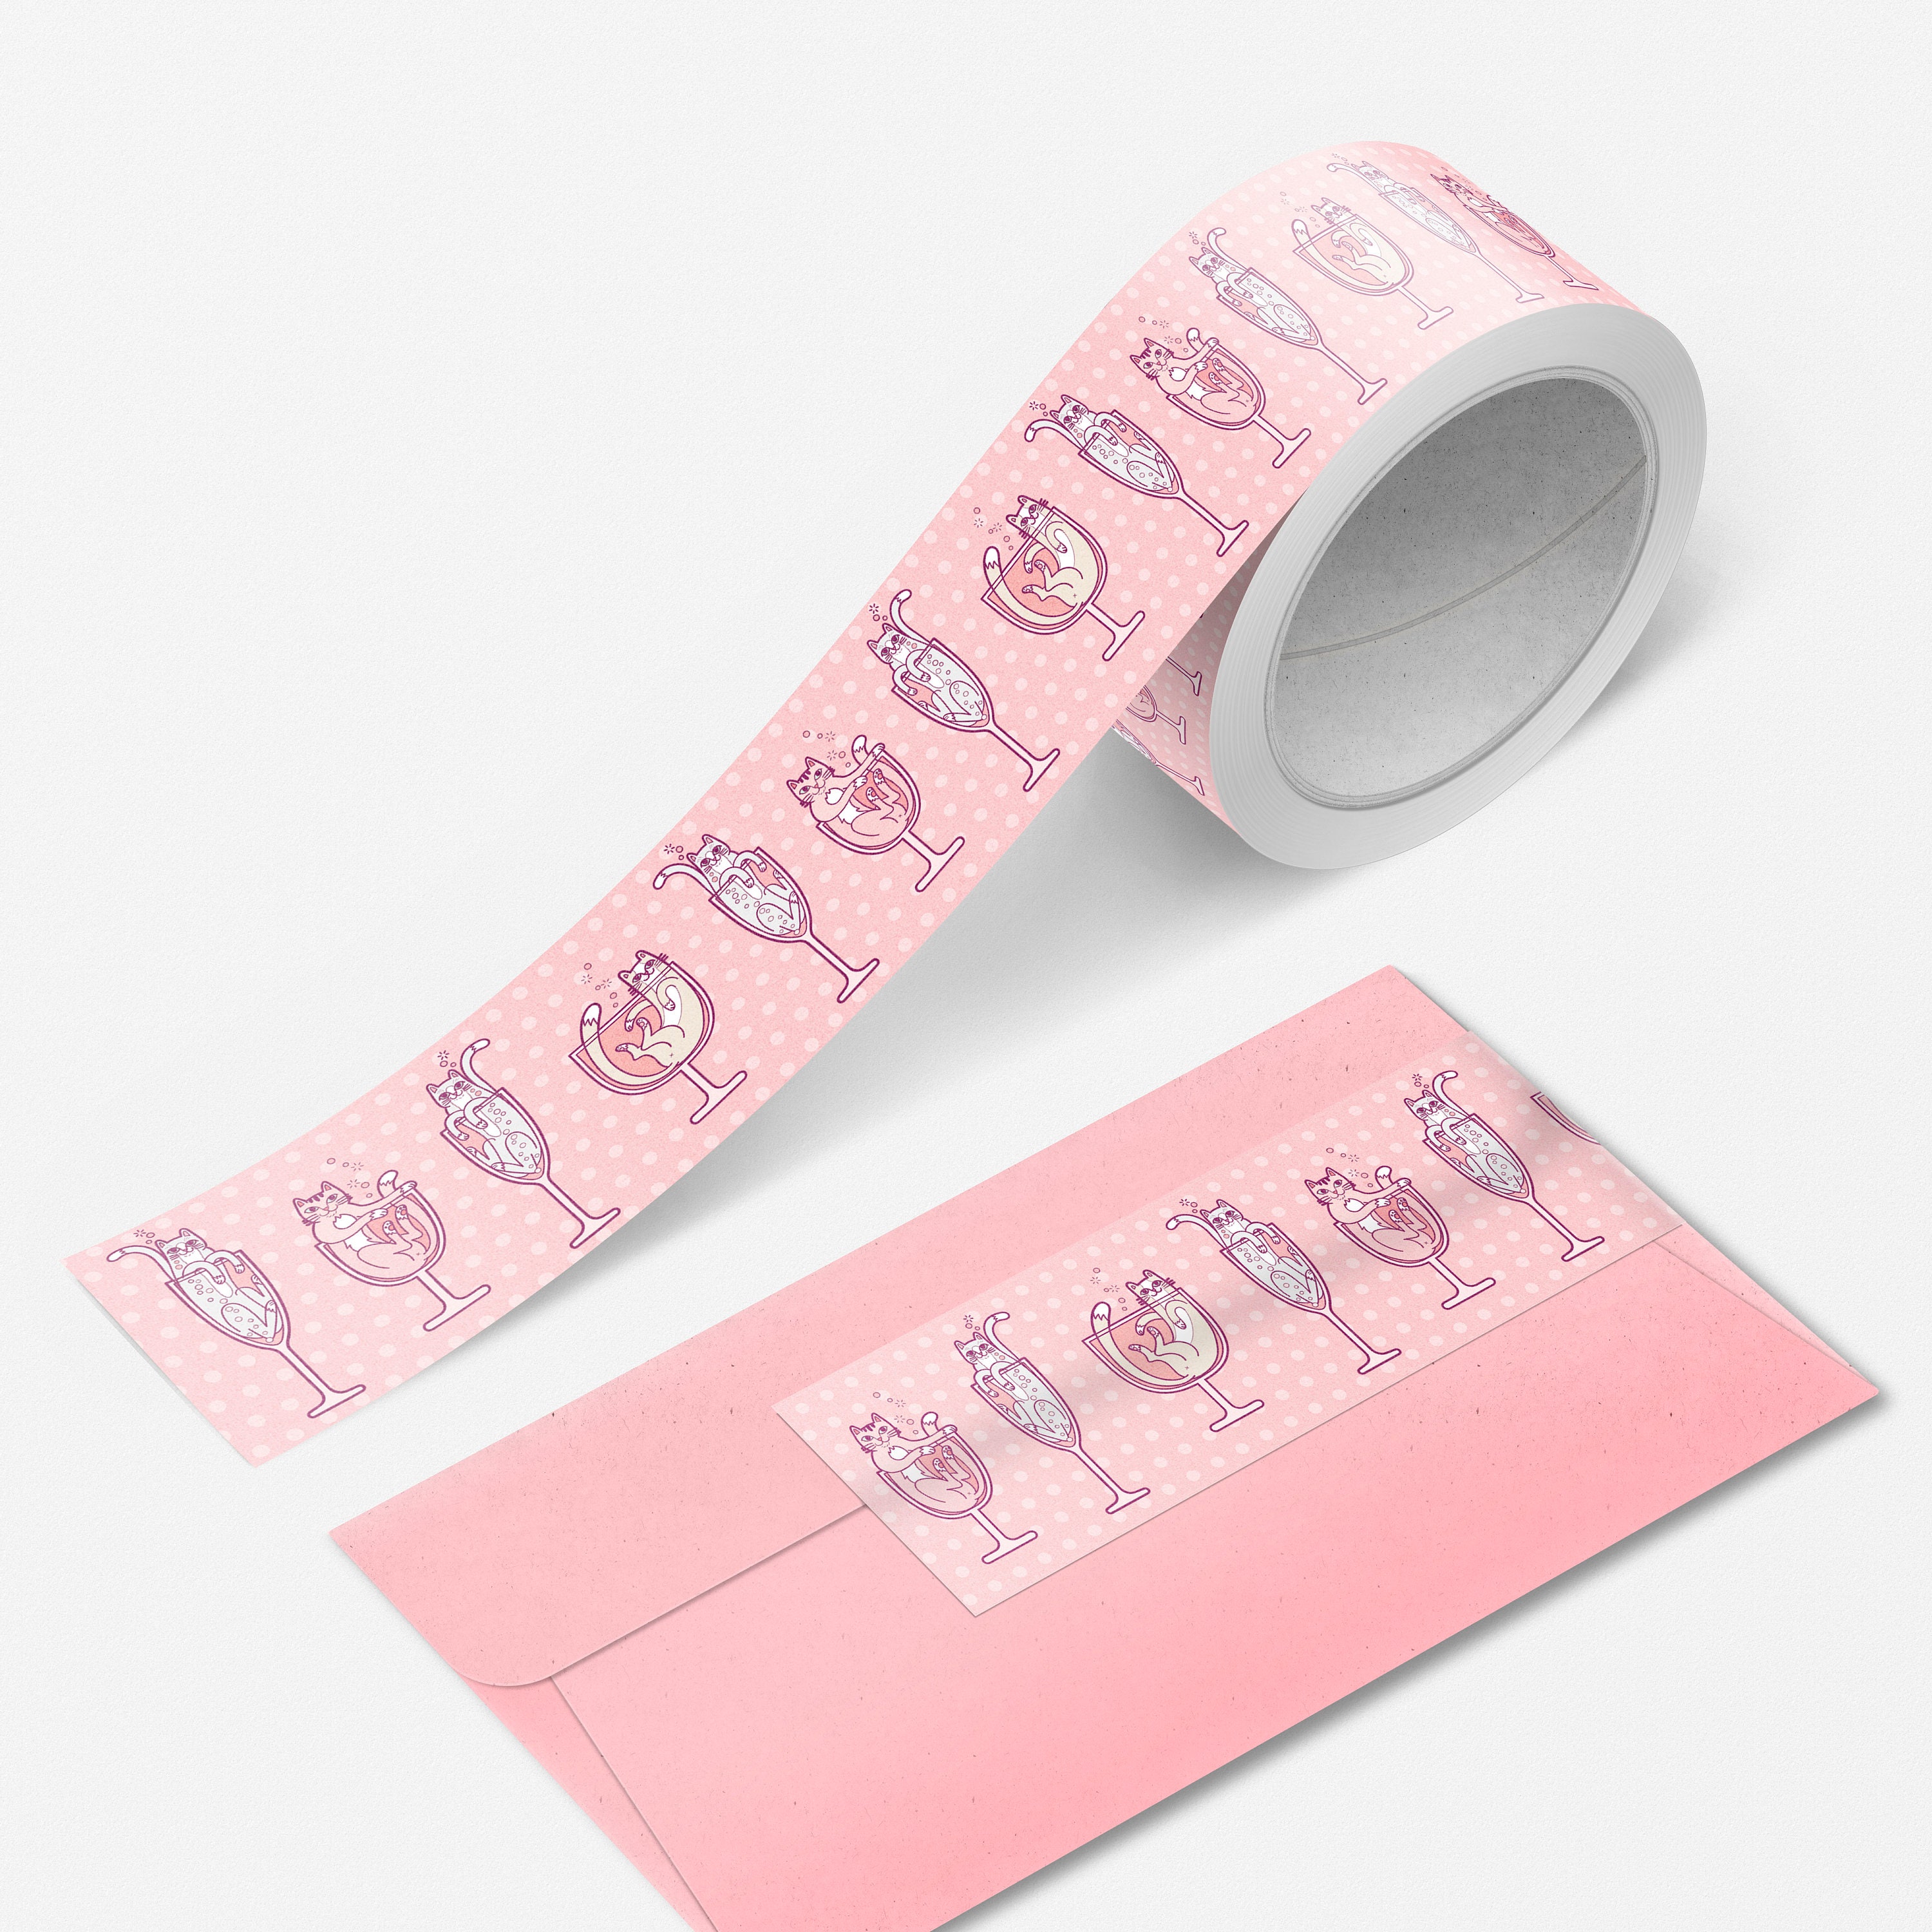 Cute Cat & Hot Drinks Cozy Winter Washi tape – Sparkles in the Wild